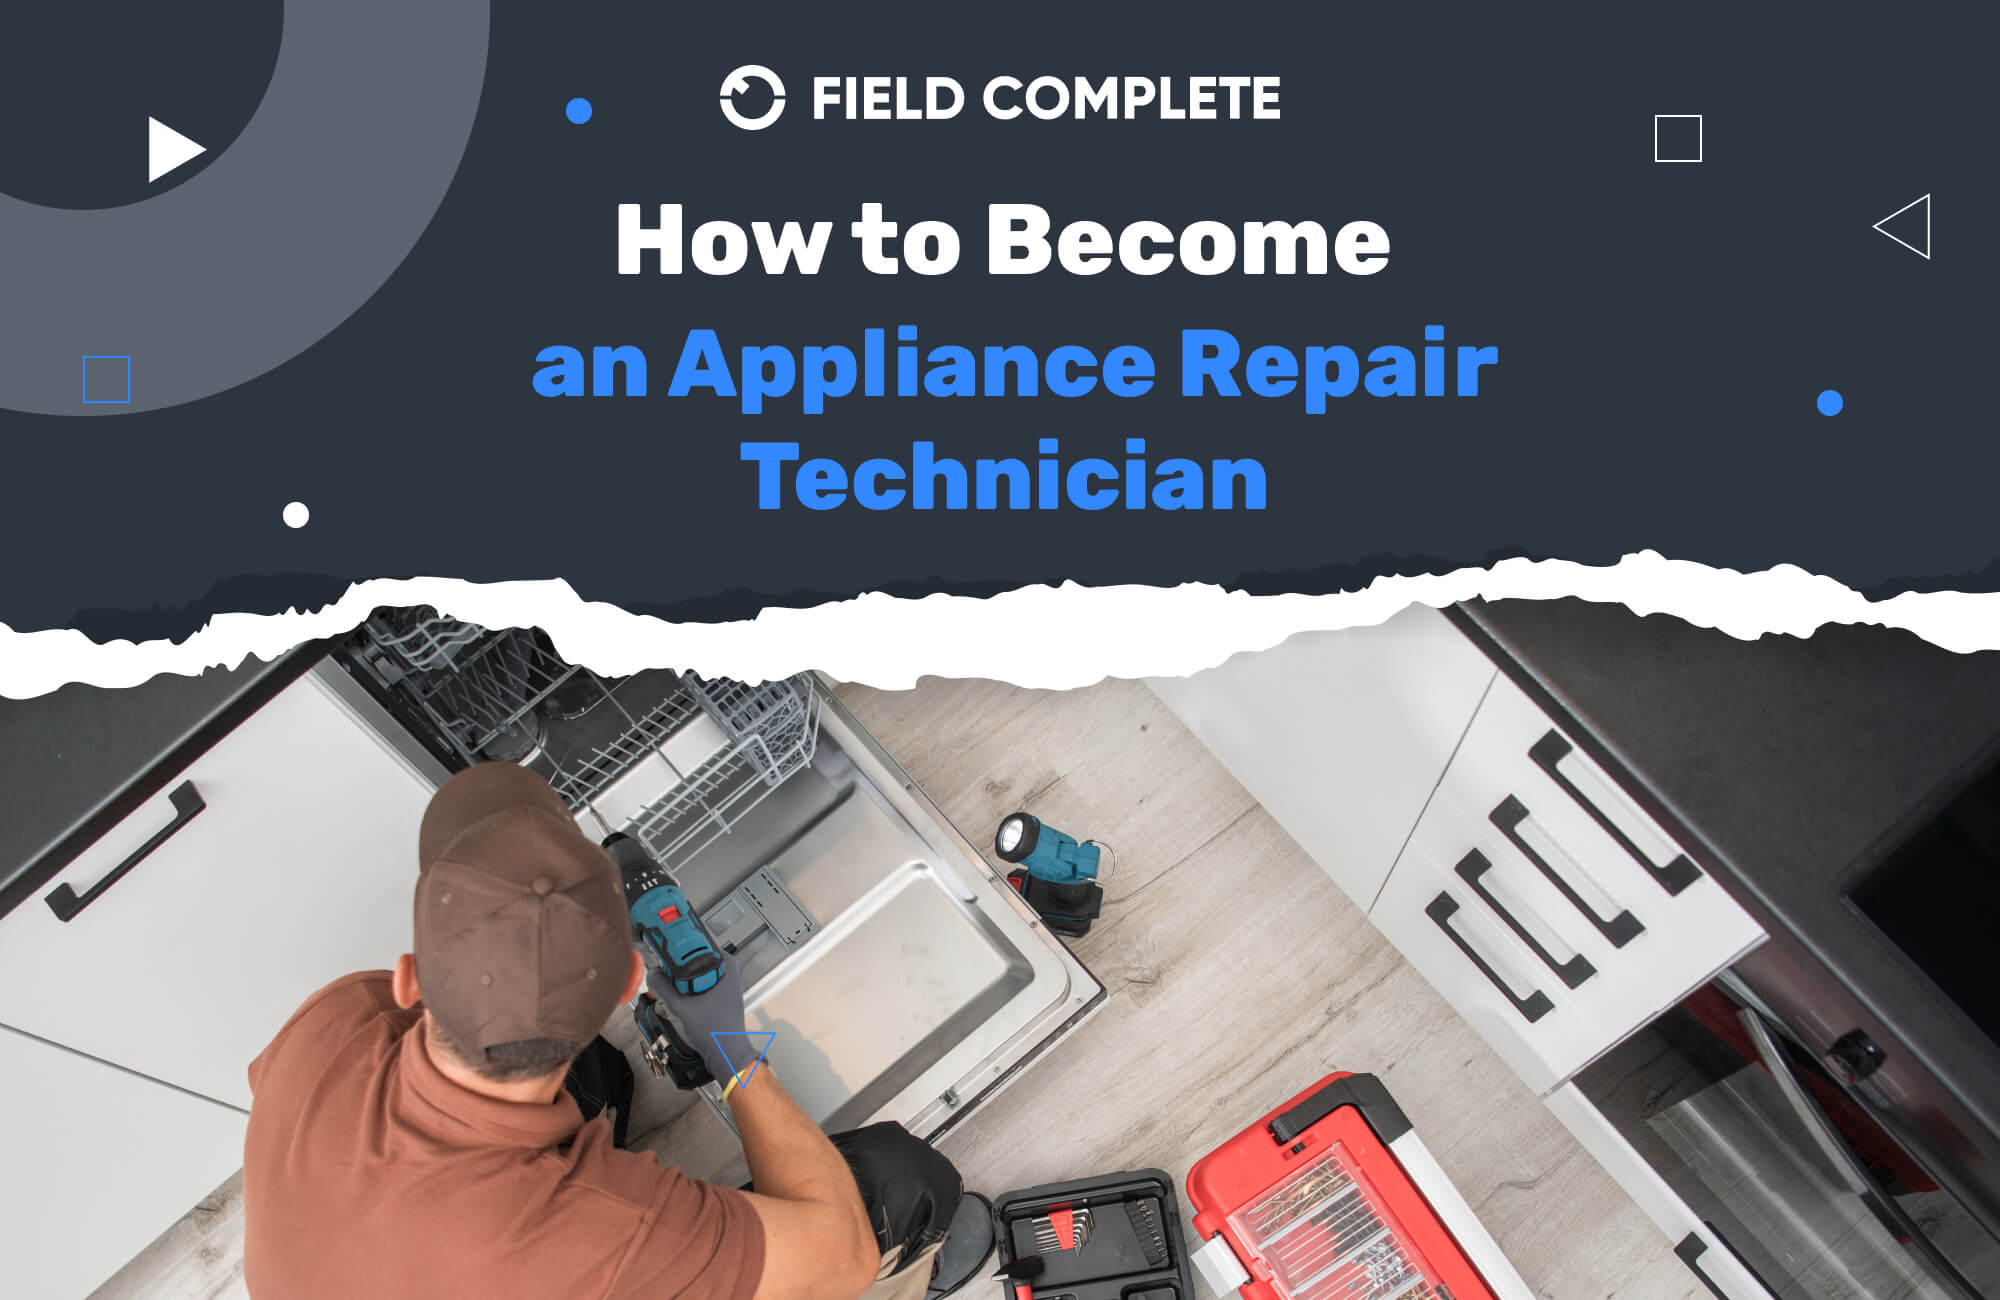 How to Become an Appliance Repair Technician